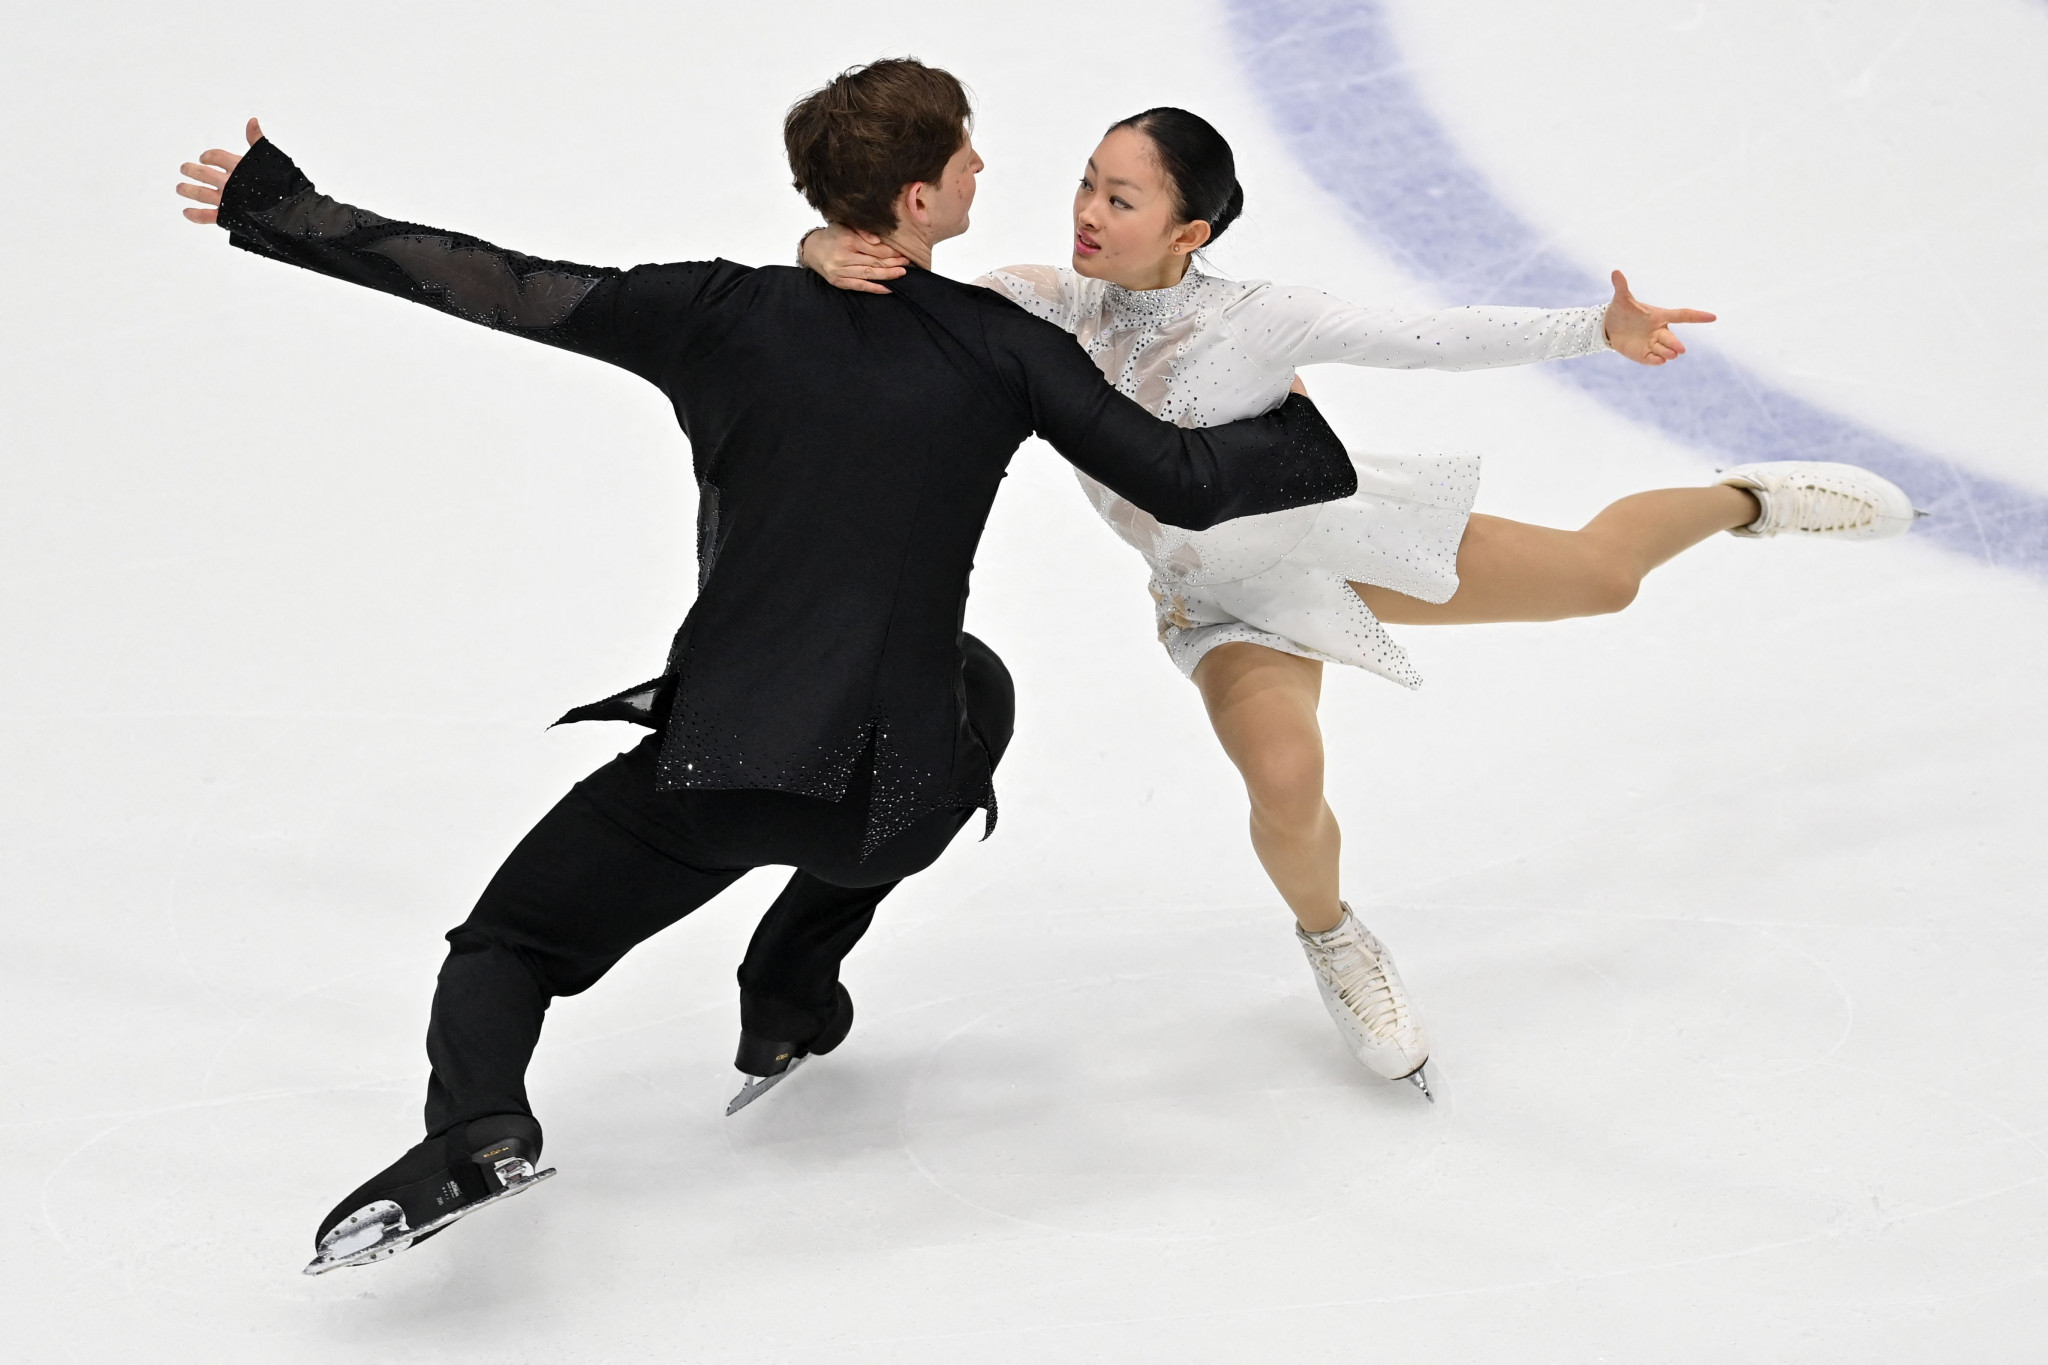 Lu and Mitrofanov win second pairs title at Four Continents Figure Skating Championships